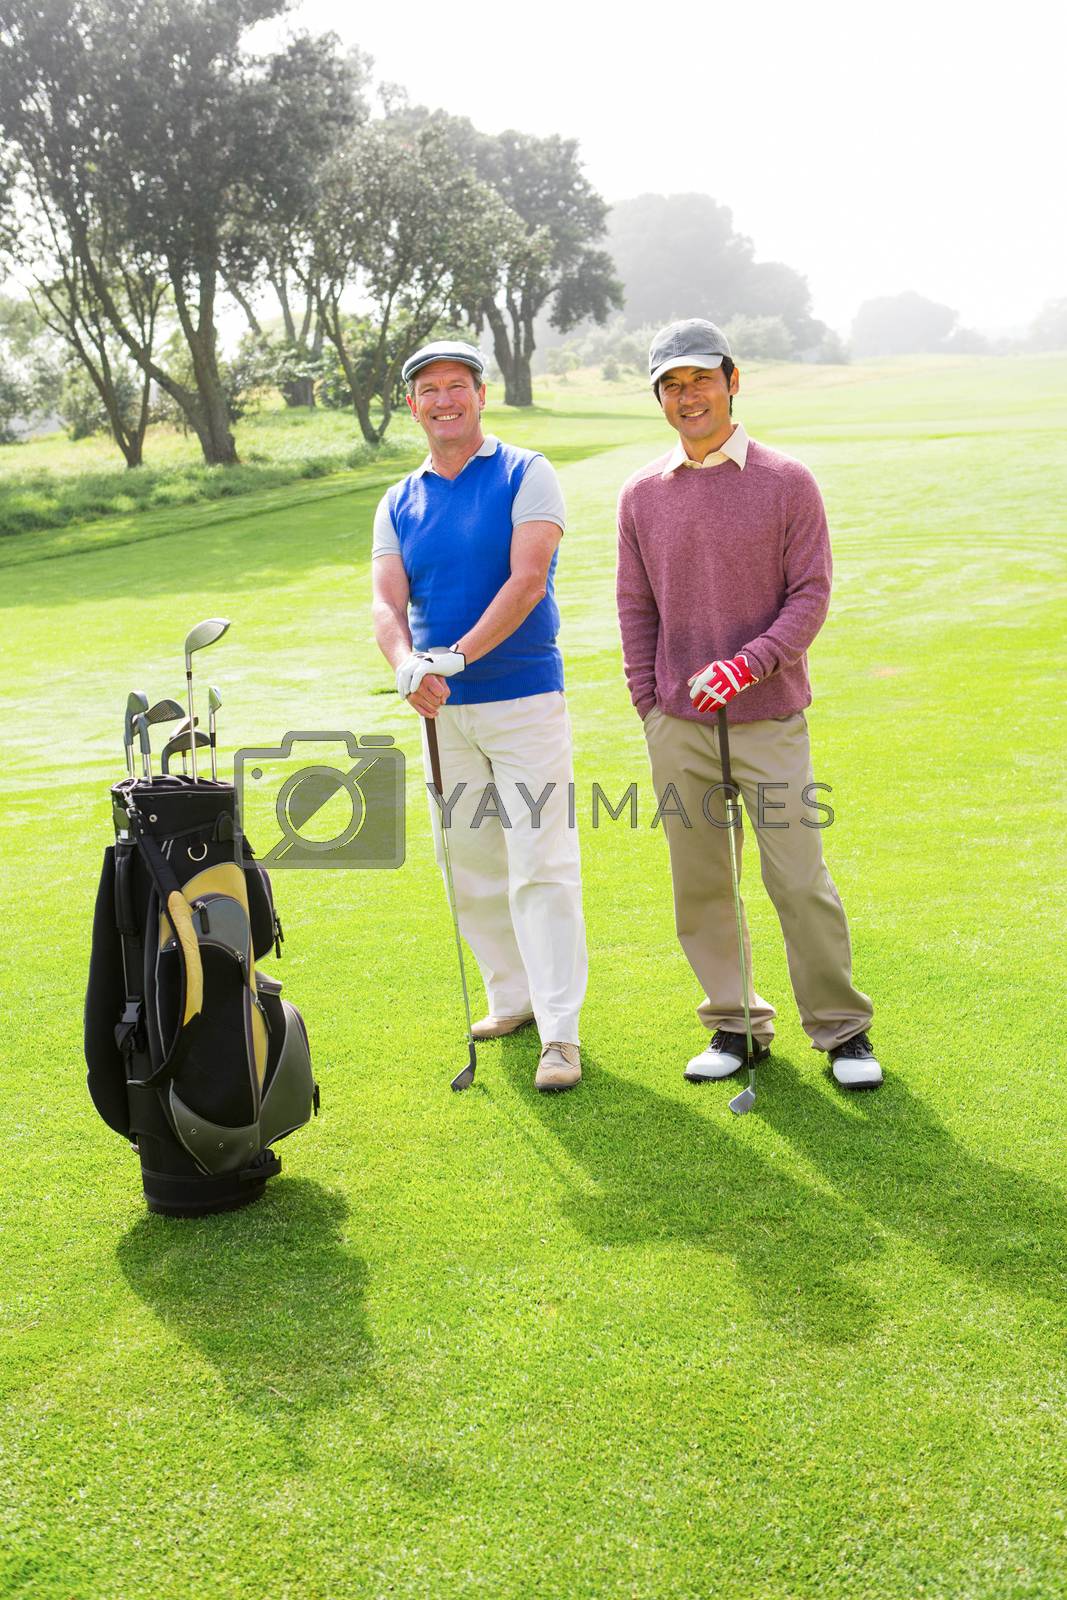 Royalty free image of Golfing friends smiling at camera holding clubs by Wavebreakmedia